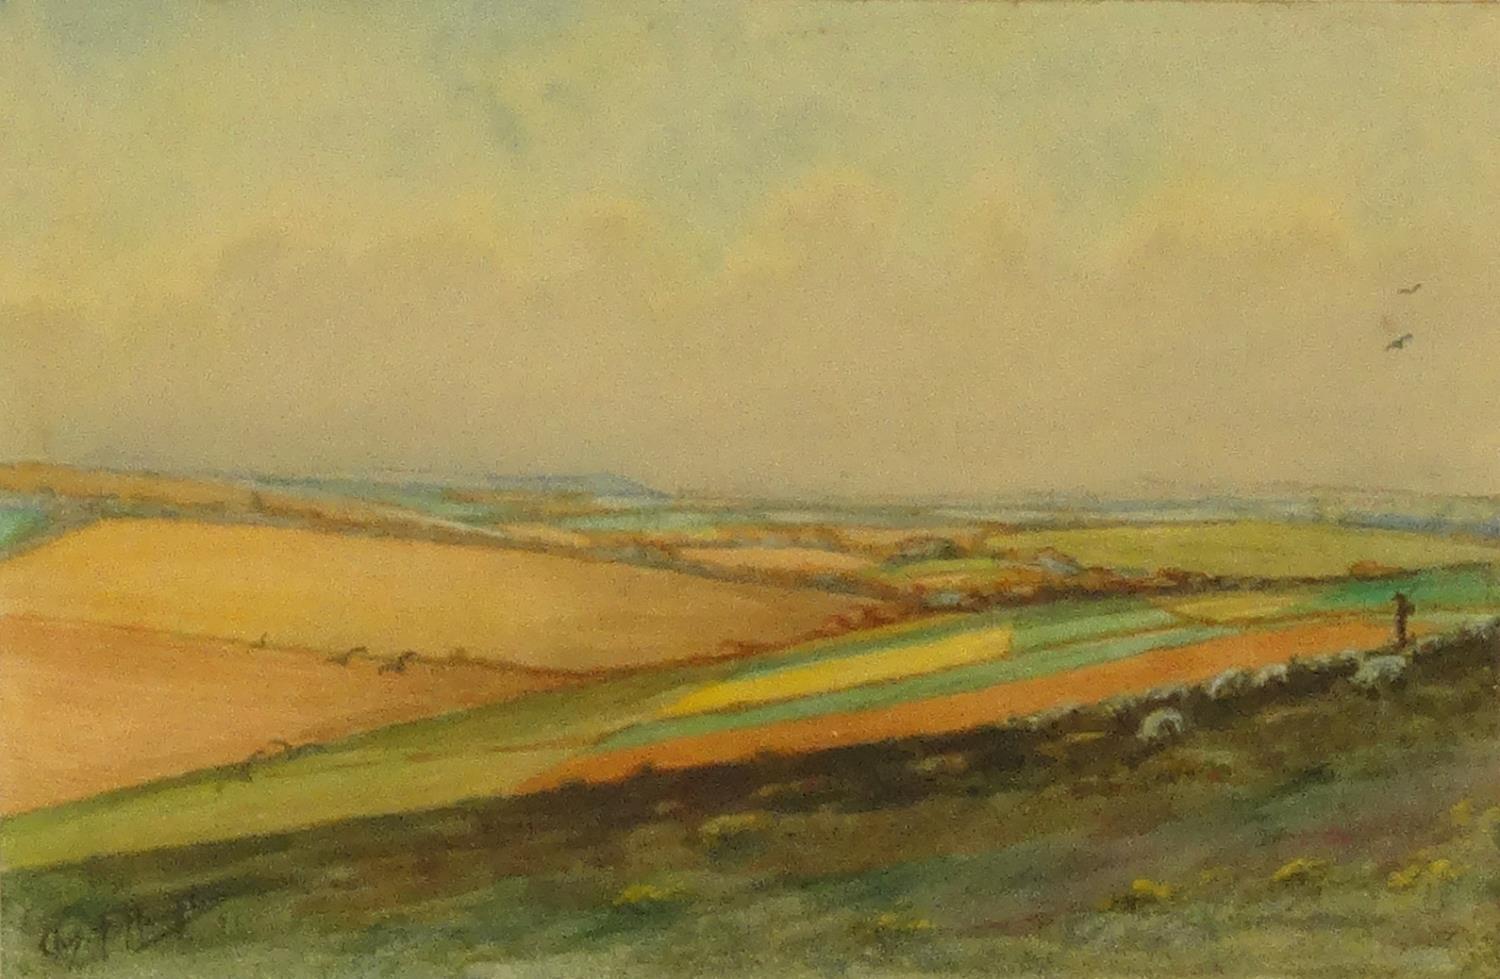 Charles F. Humphrey - Watercolour of a landscape mounted and framed, 22cm x 14cm excluding the mount